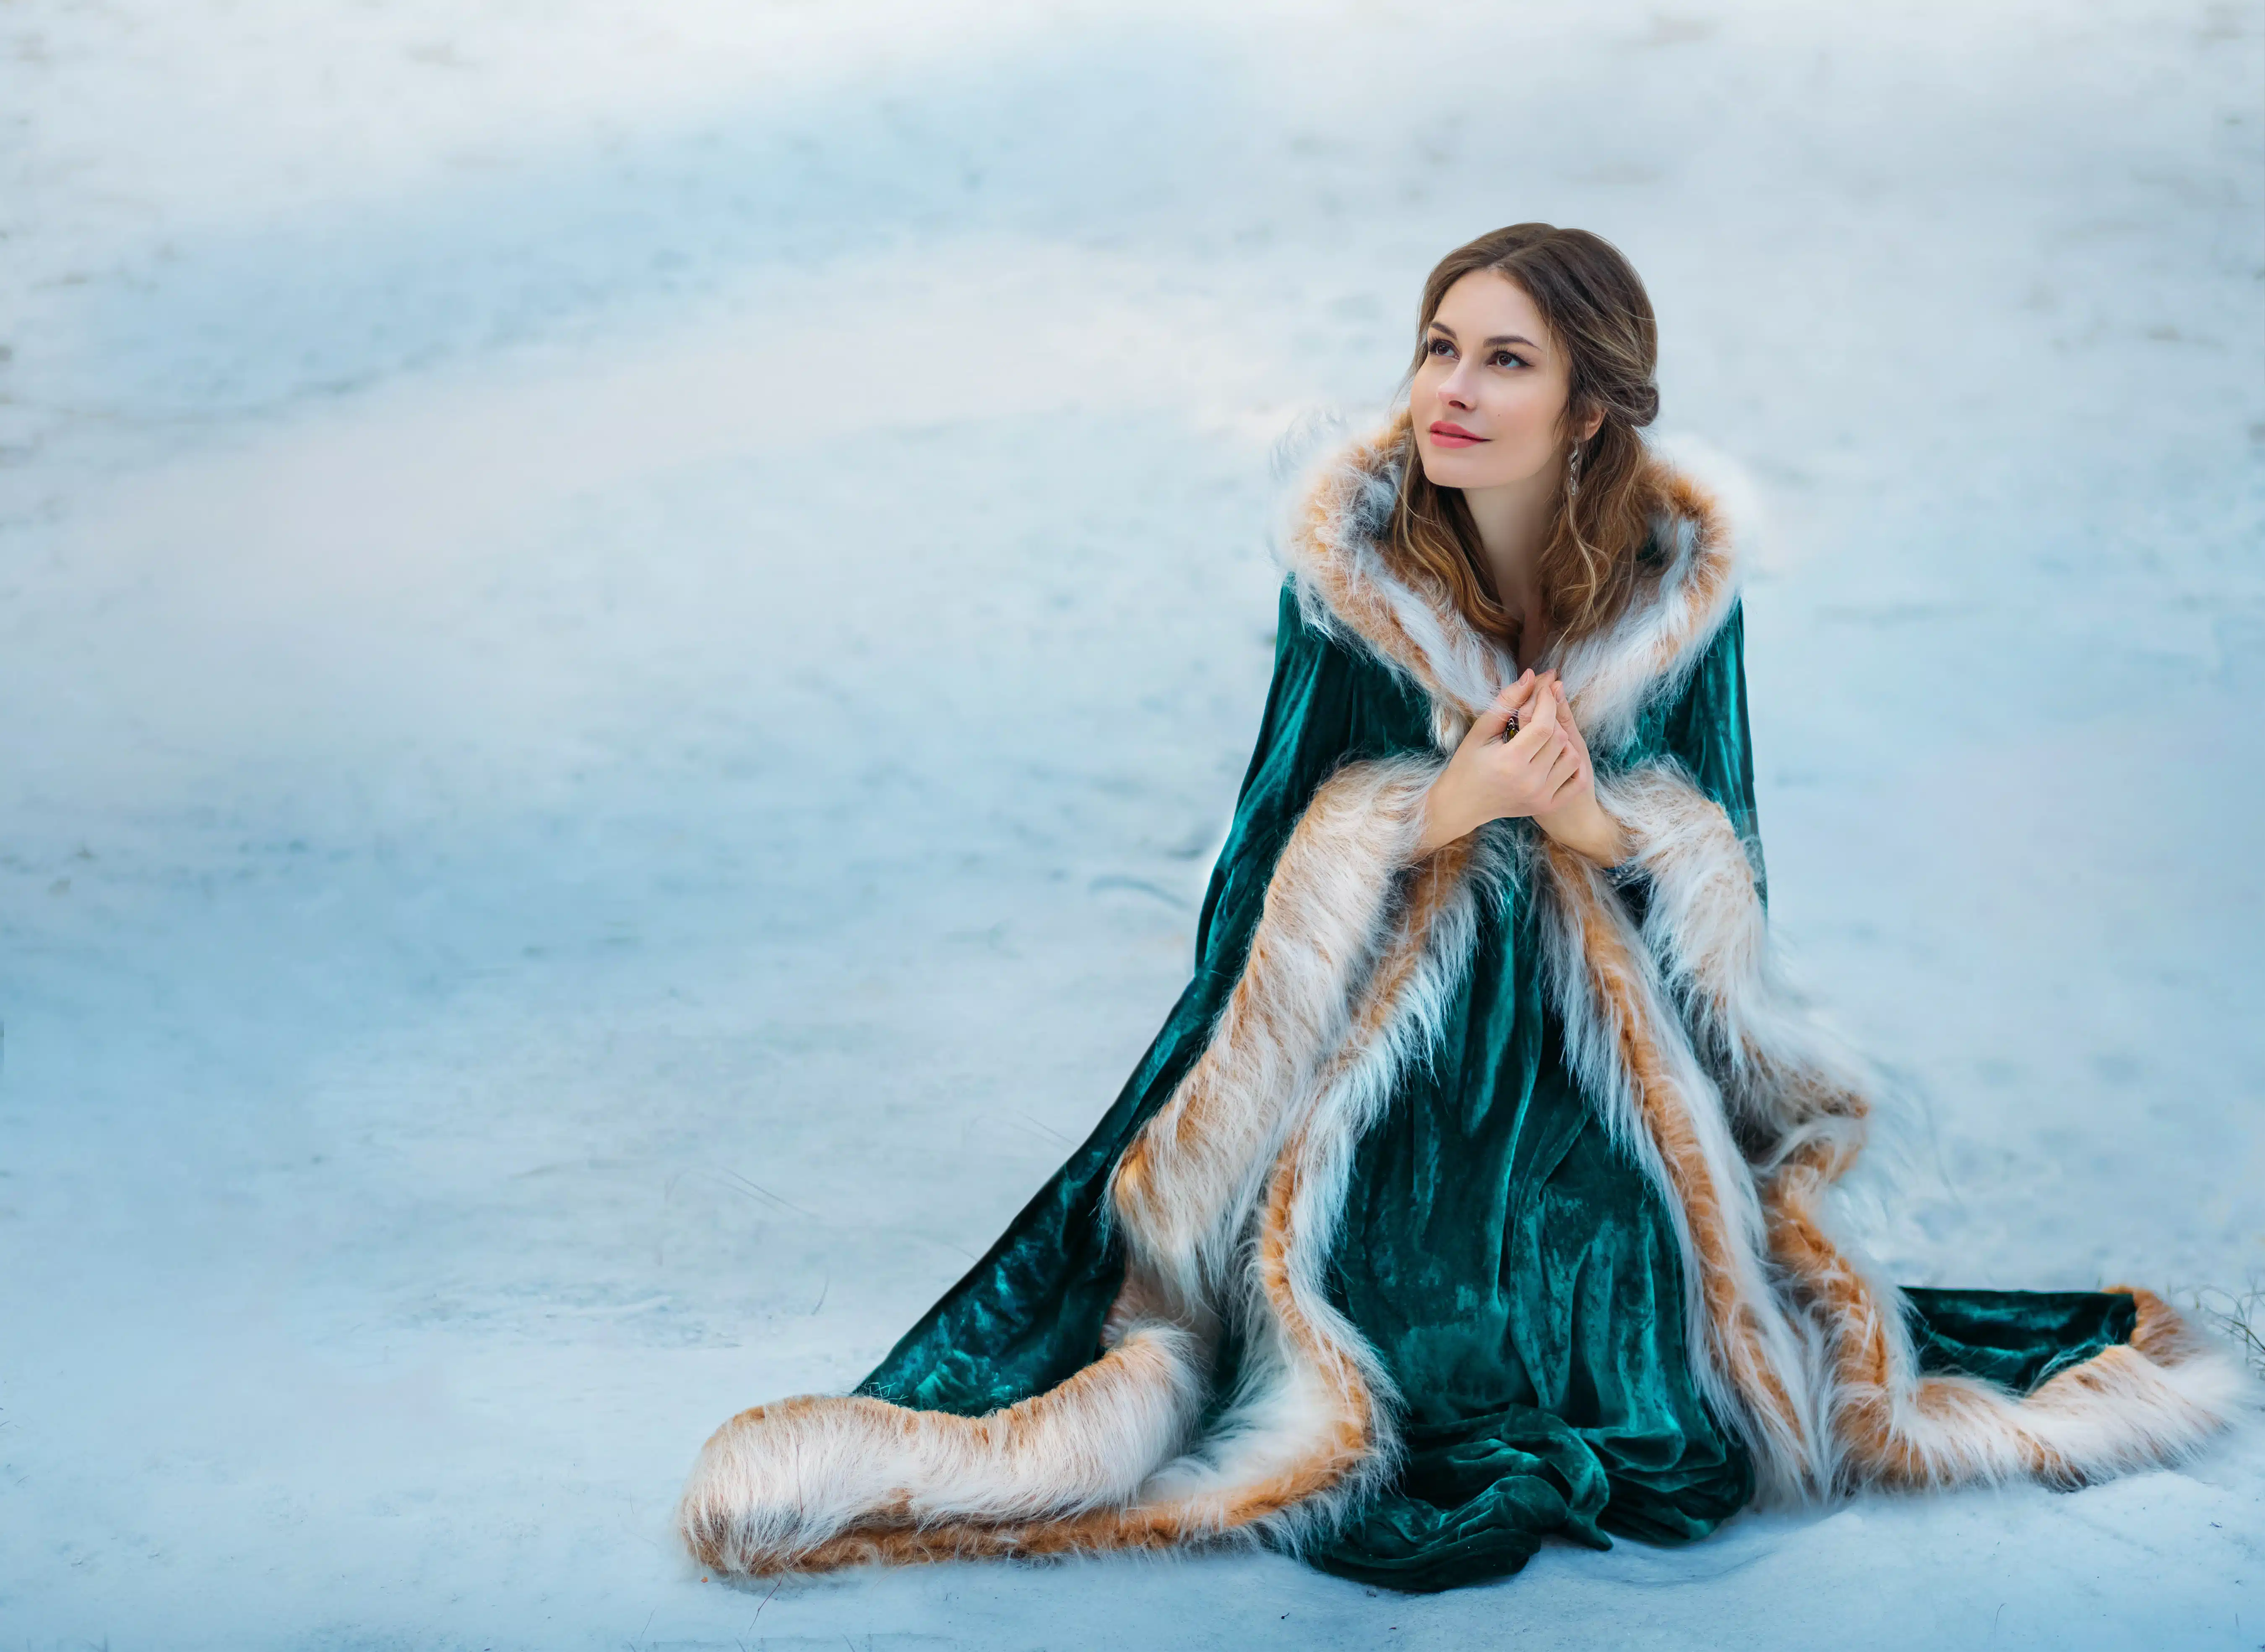 Fantasy woman sits on white snow in winter forest. Princess girl smiling face. Green long velvet vintage coat fur. Mystical image of frozen lady wanderer.